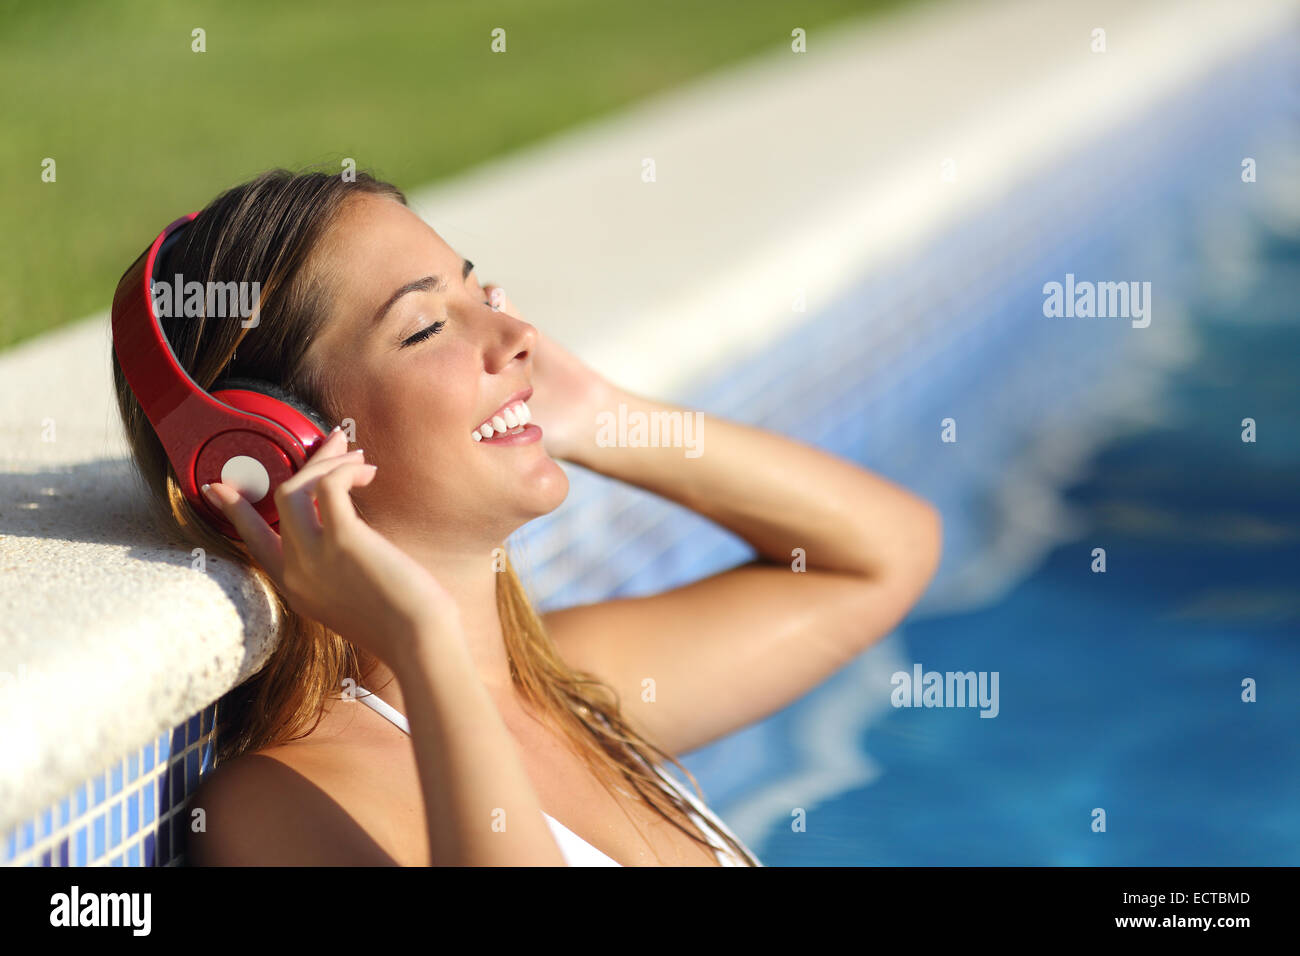 Relaxed woman listening to the music with headphones bathing in a pool Stock Photo